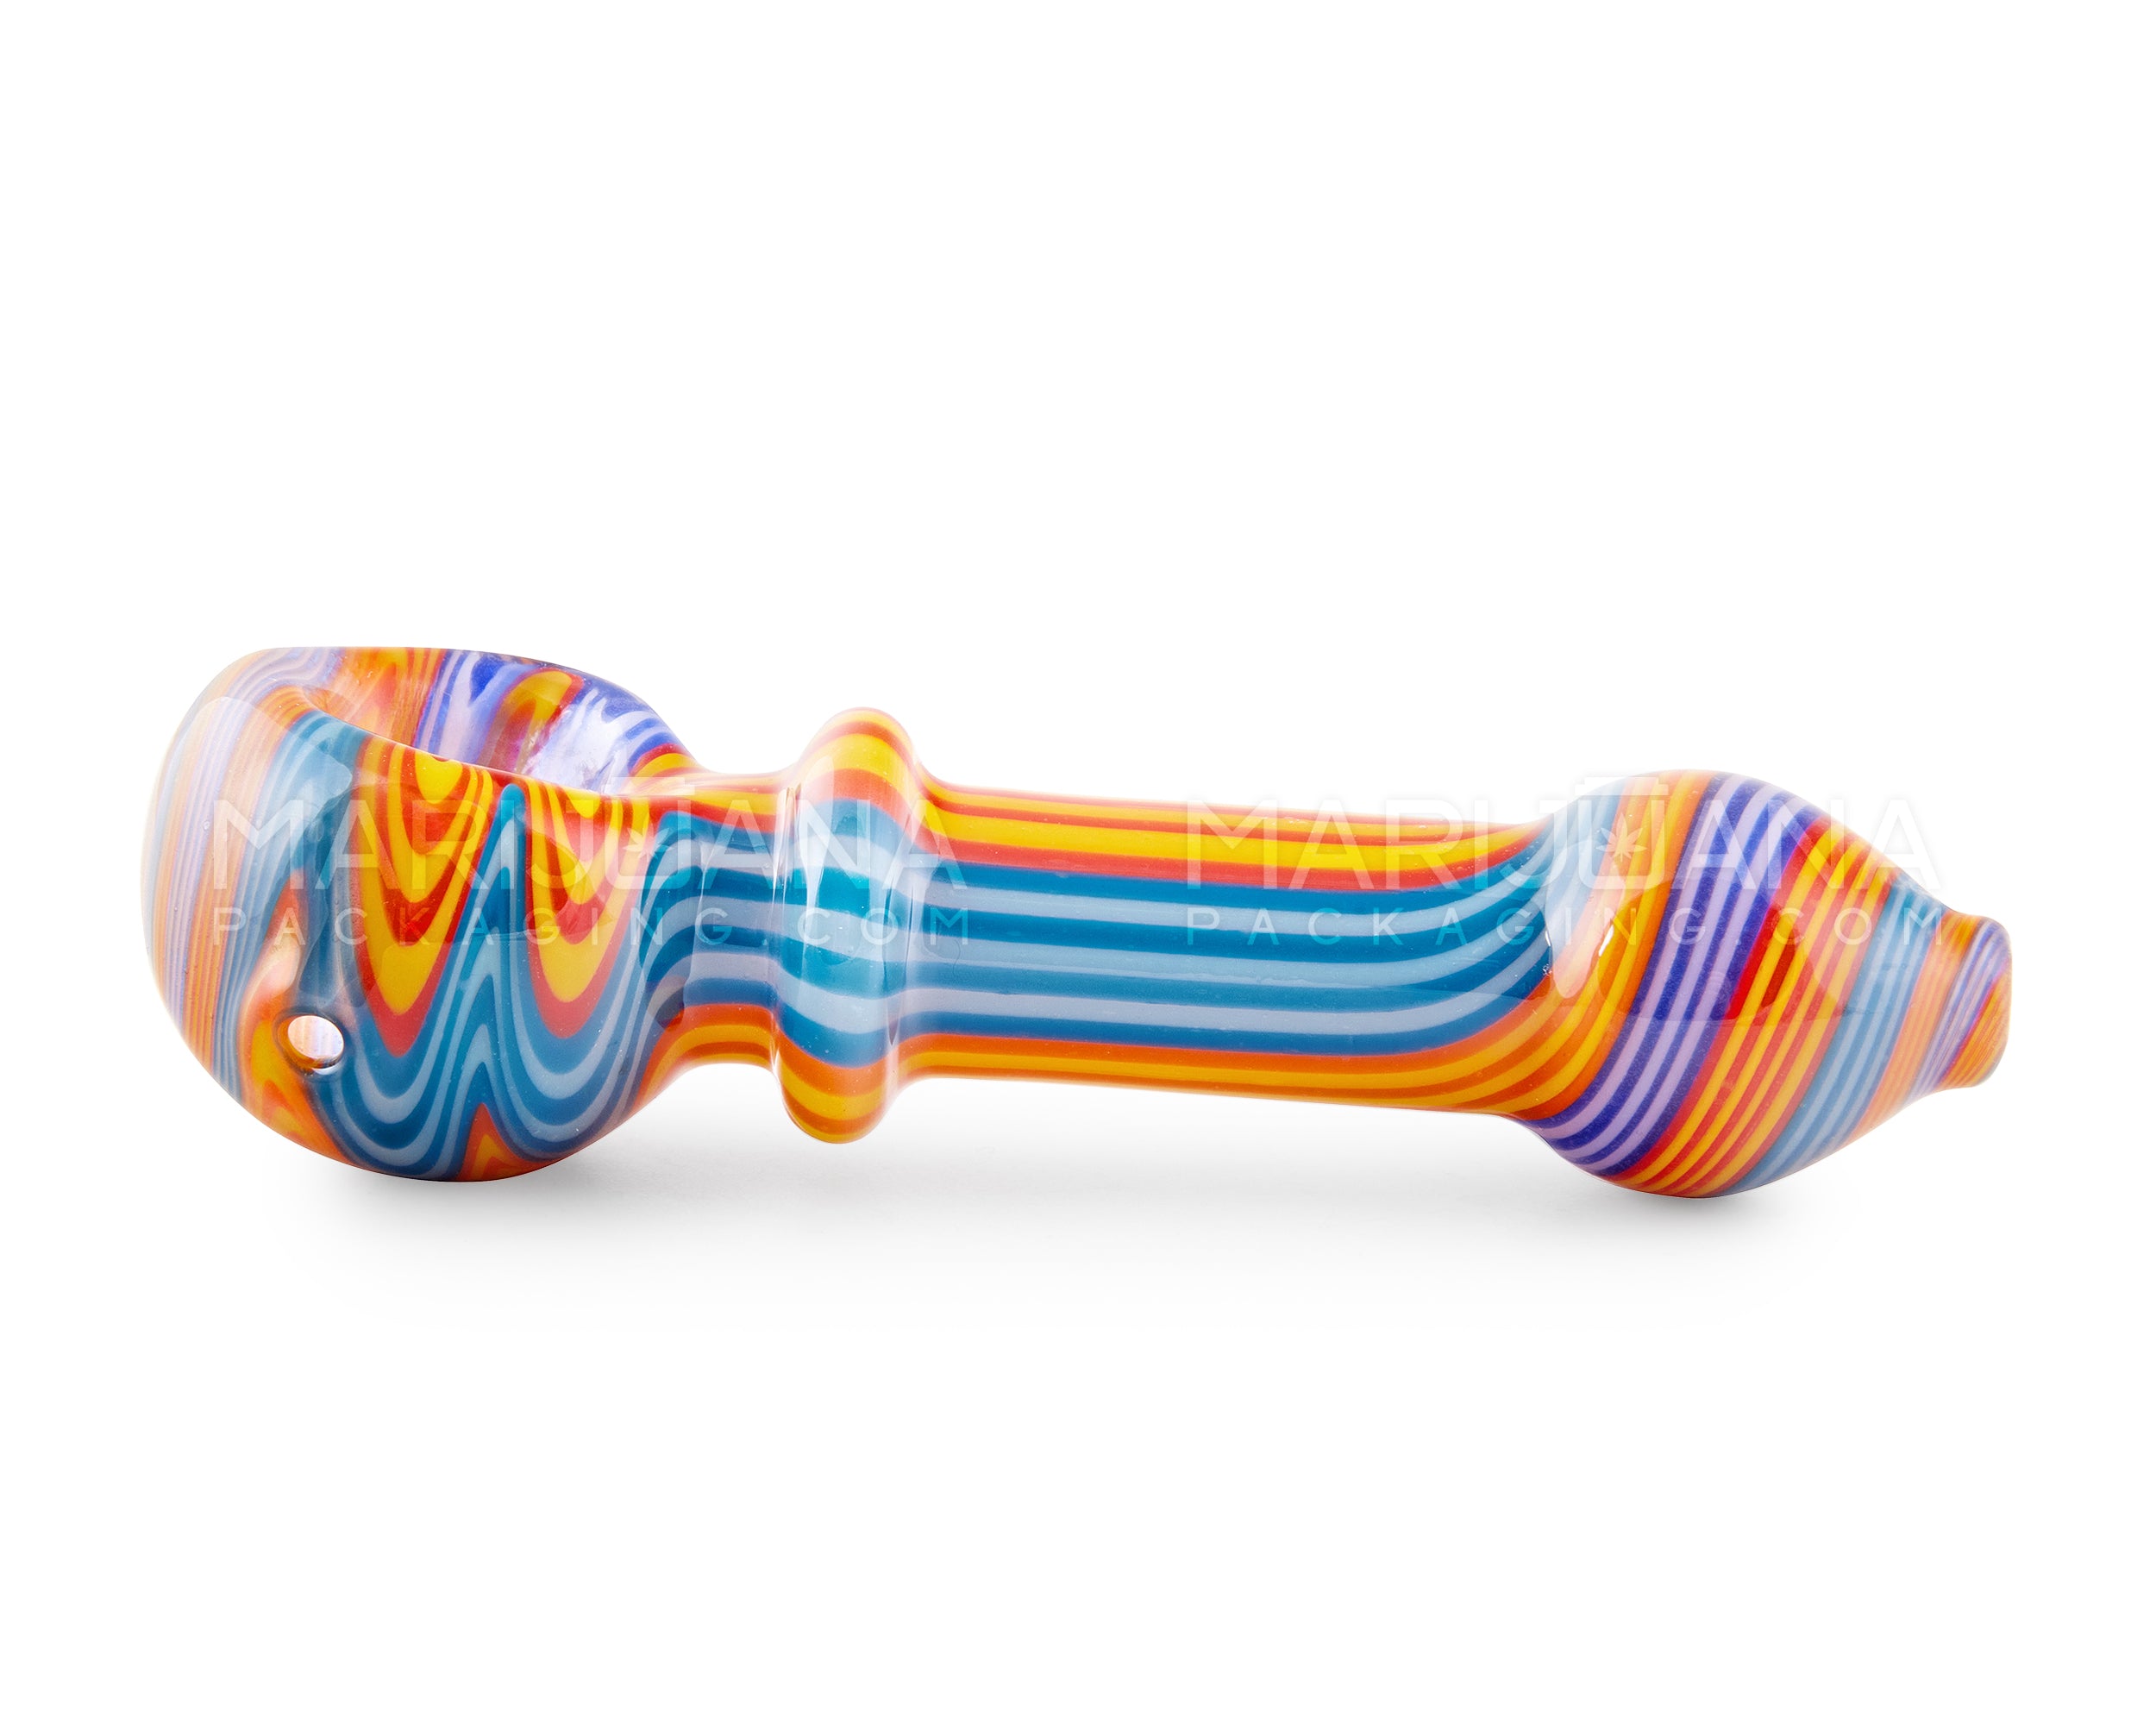 Wig Wag & Swirl Spoon Hand Pipe | 4.5in Long - Glass - Assorted